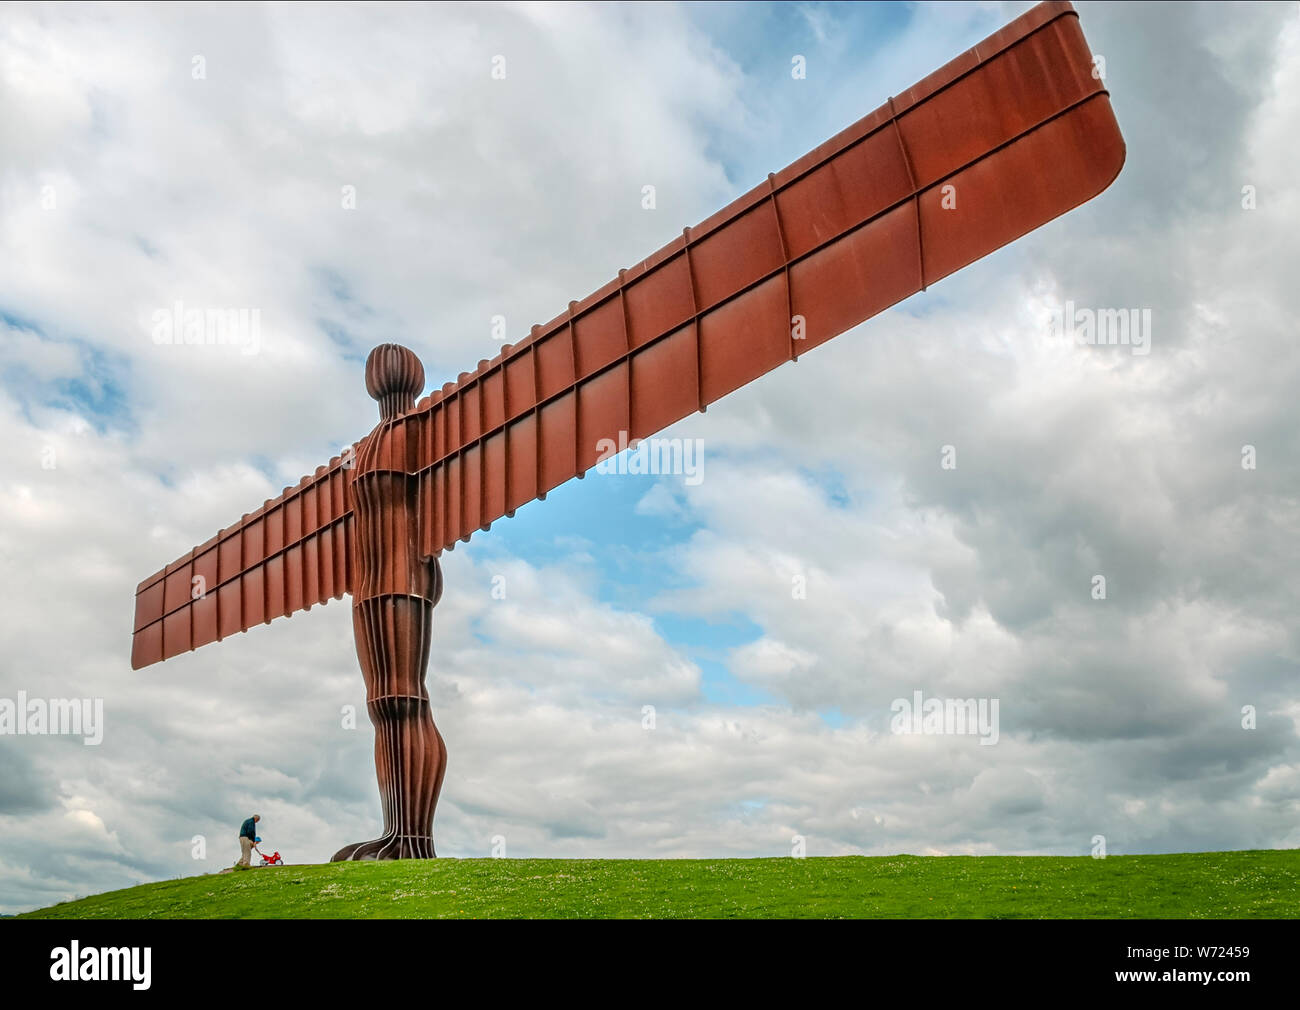 'Angel of the North' sculpture near Gateshead, Nord East England, UK Stock Photo